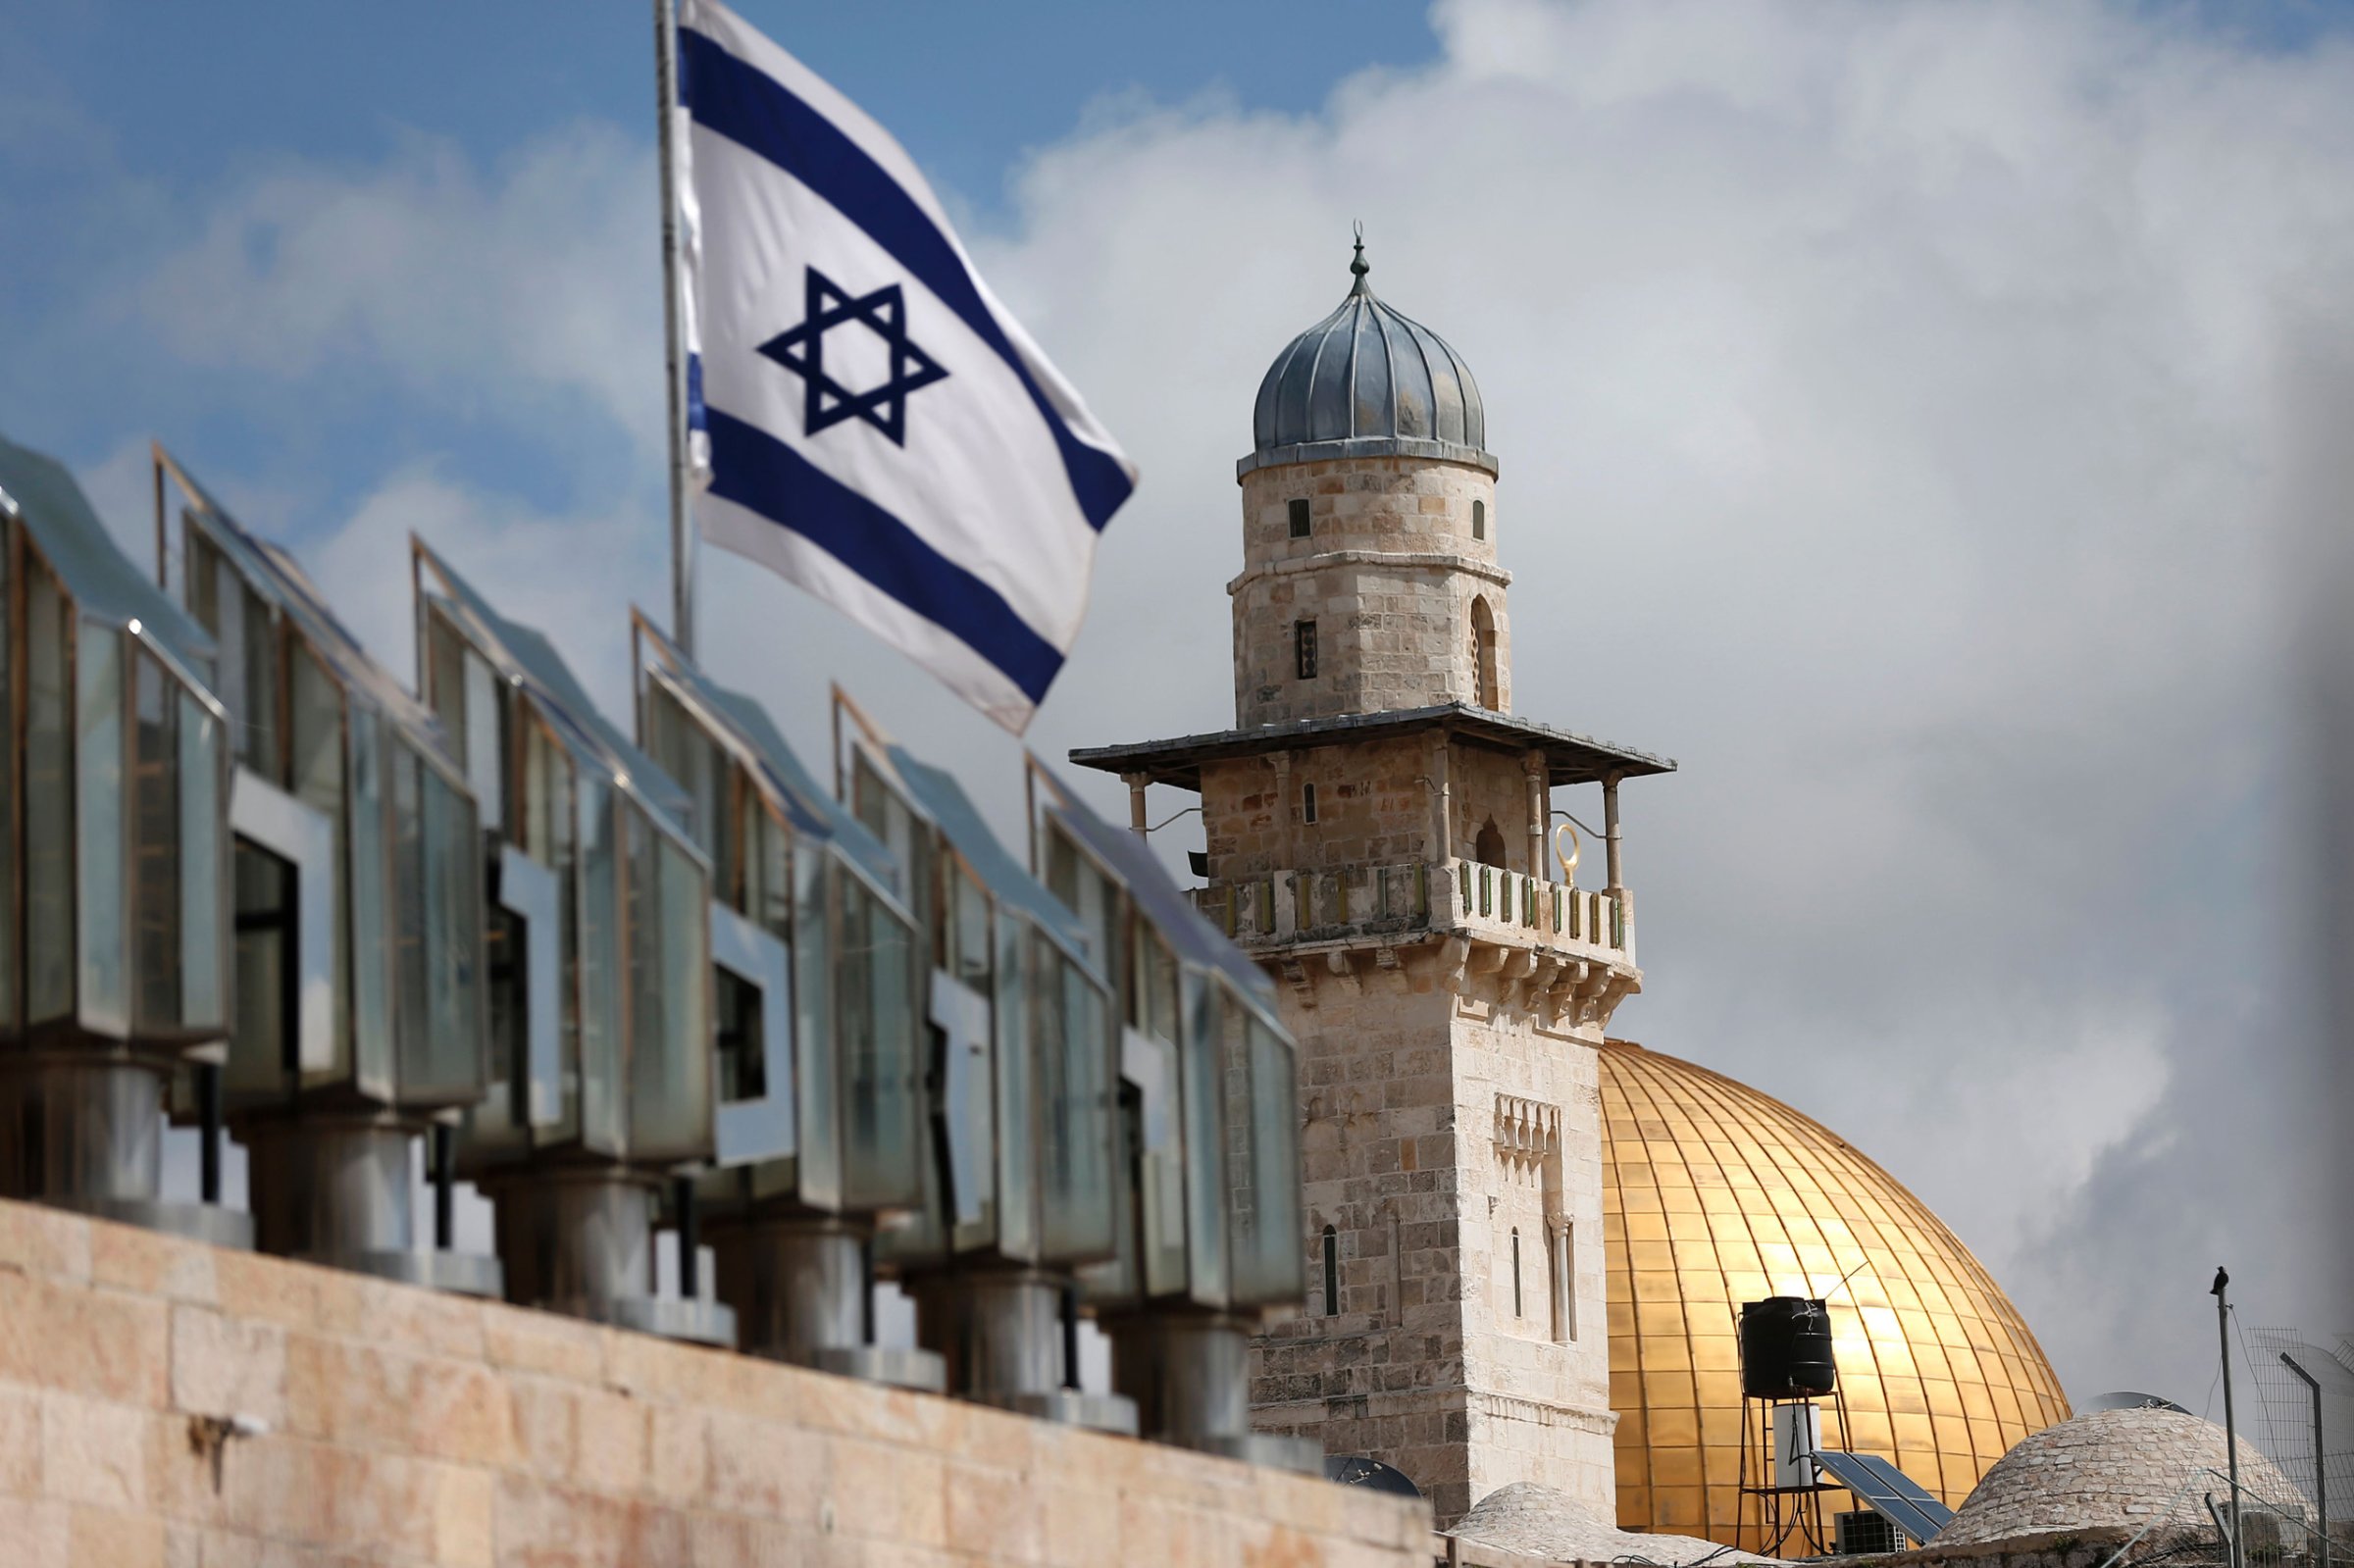 An Israeli flag is seen fleeting in front of a minaret and the Dome of the Rock on the Al-Aqsa mosque compound in Jerusalem's Old City, on March 17, 2016.